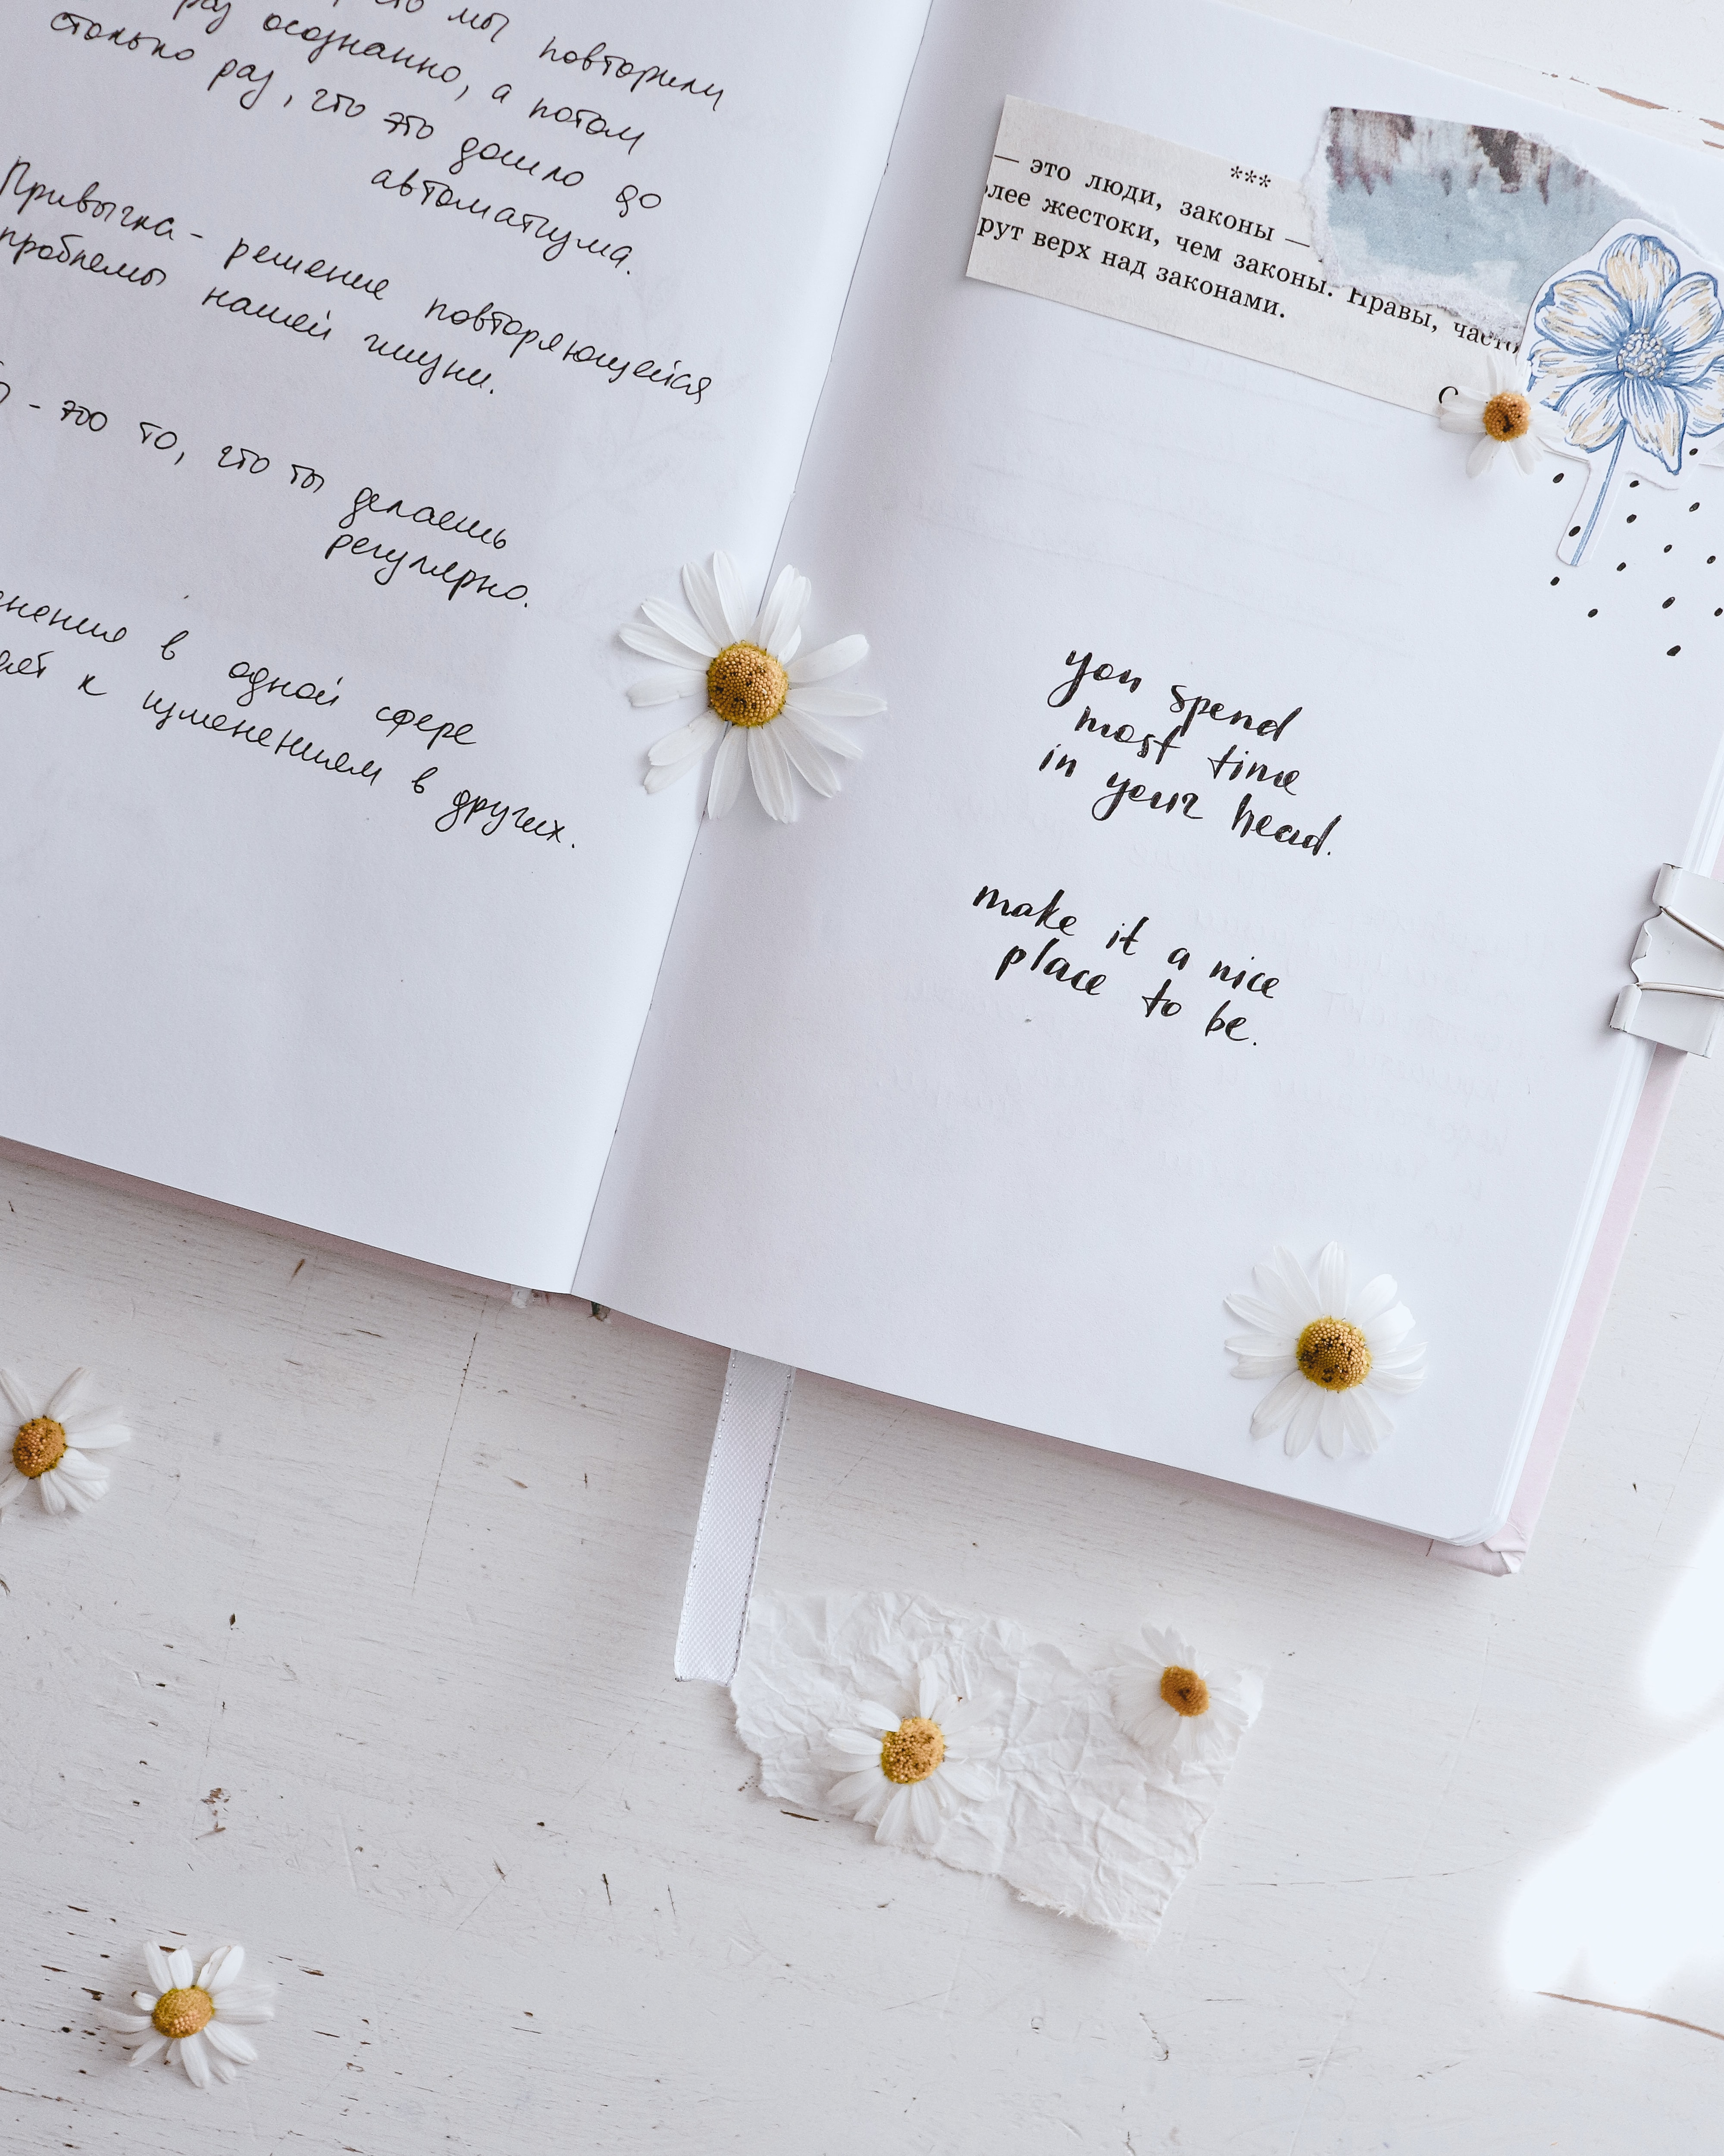 quotes, lettering, notebook, notepad, flowers, words, inscriptions, phrases